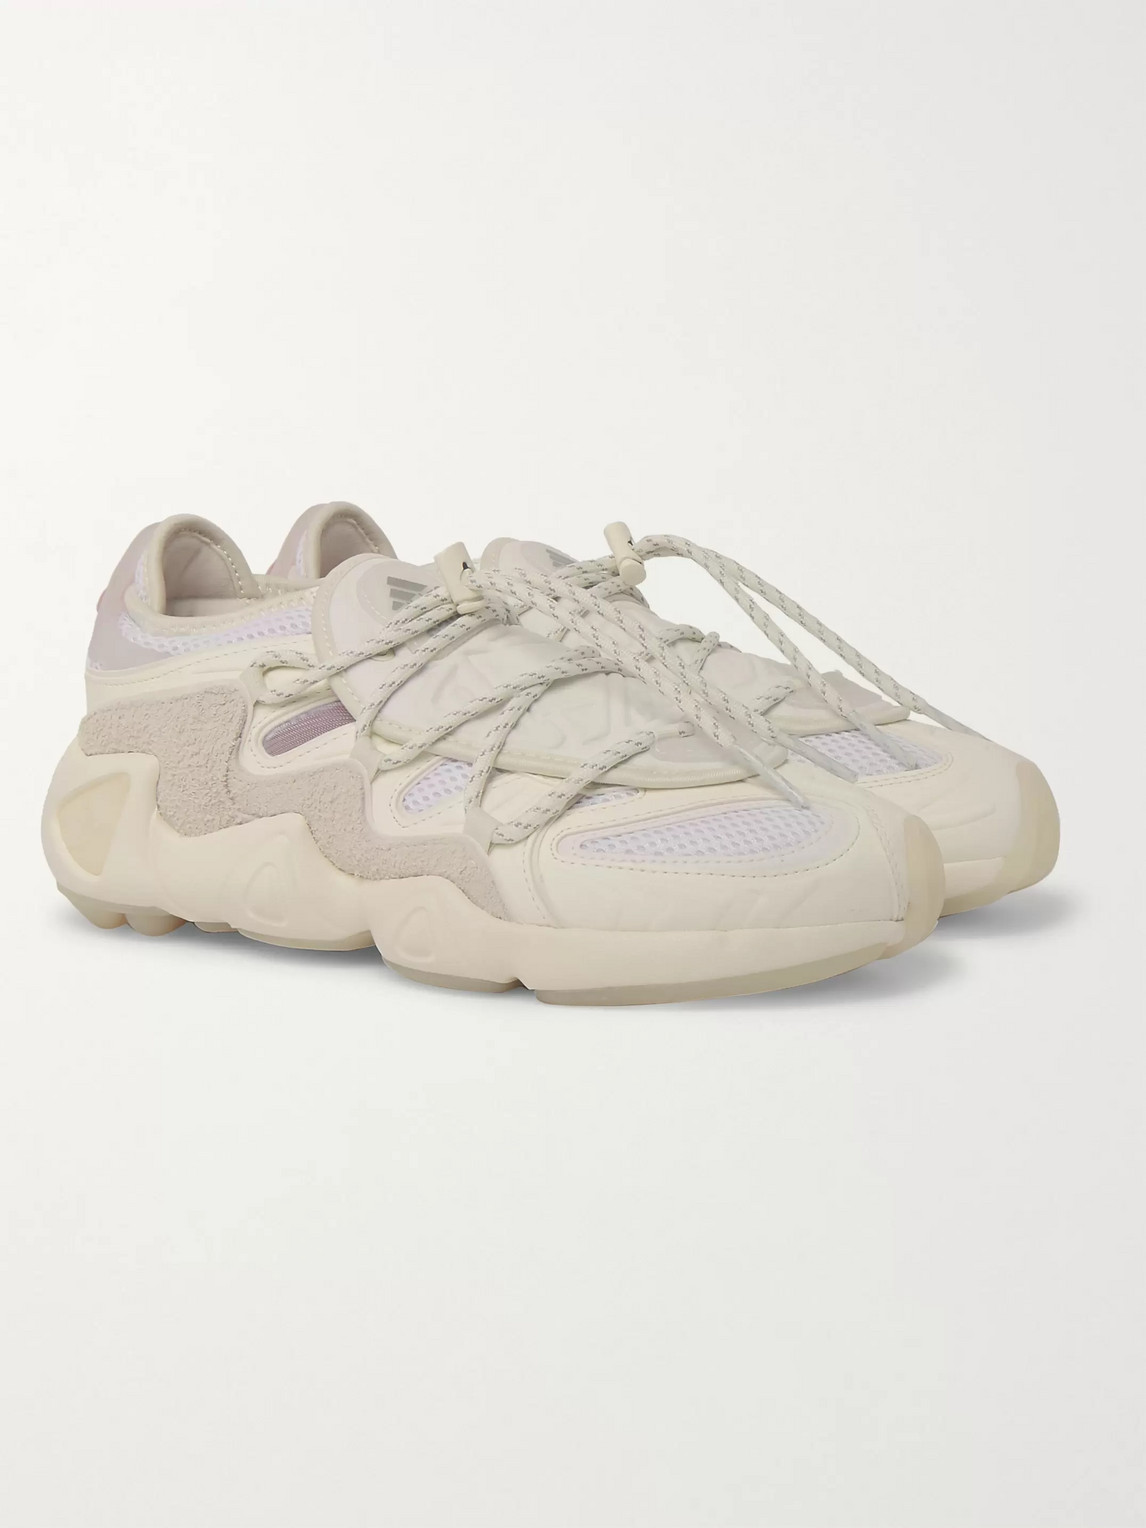 Adidas Consortium 032c Salvation Suede, Leather And Mesh Sneakers In White